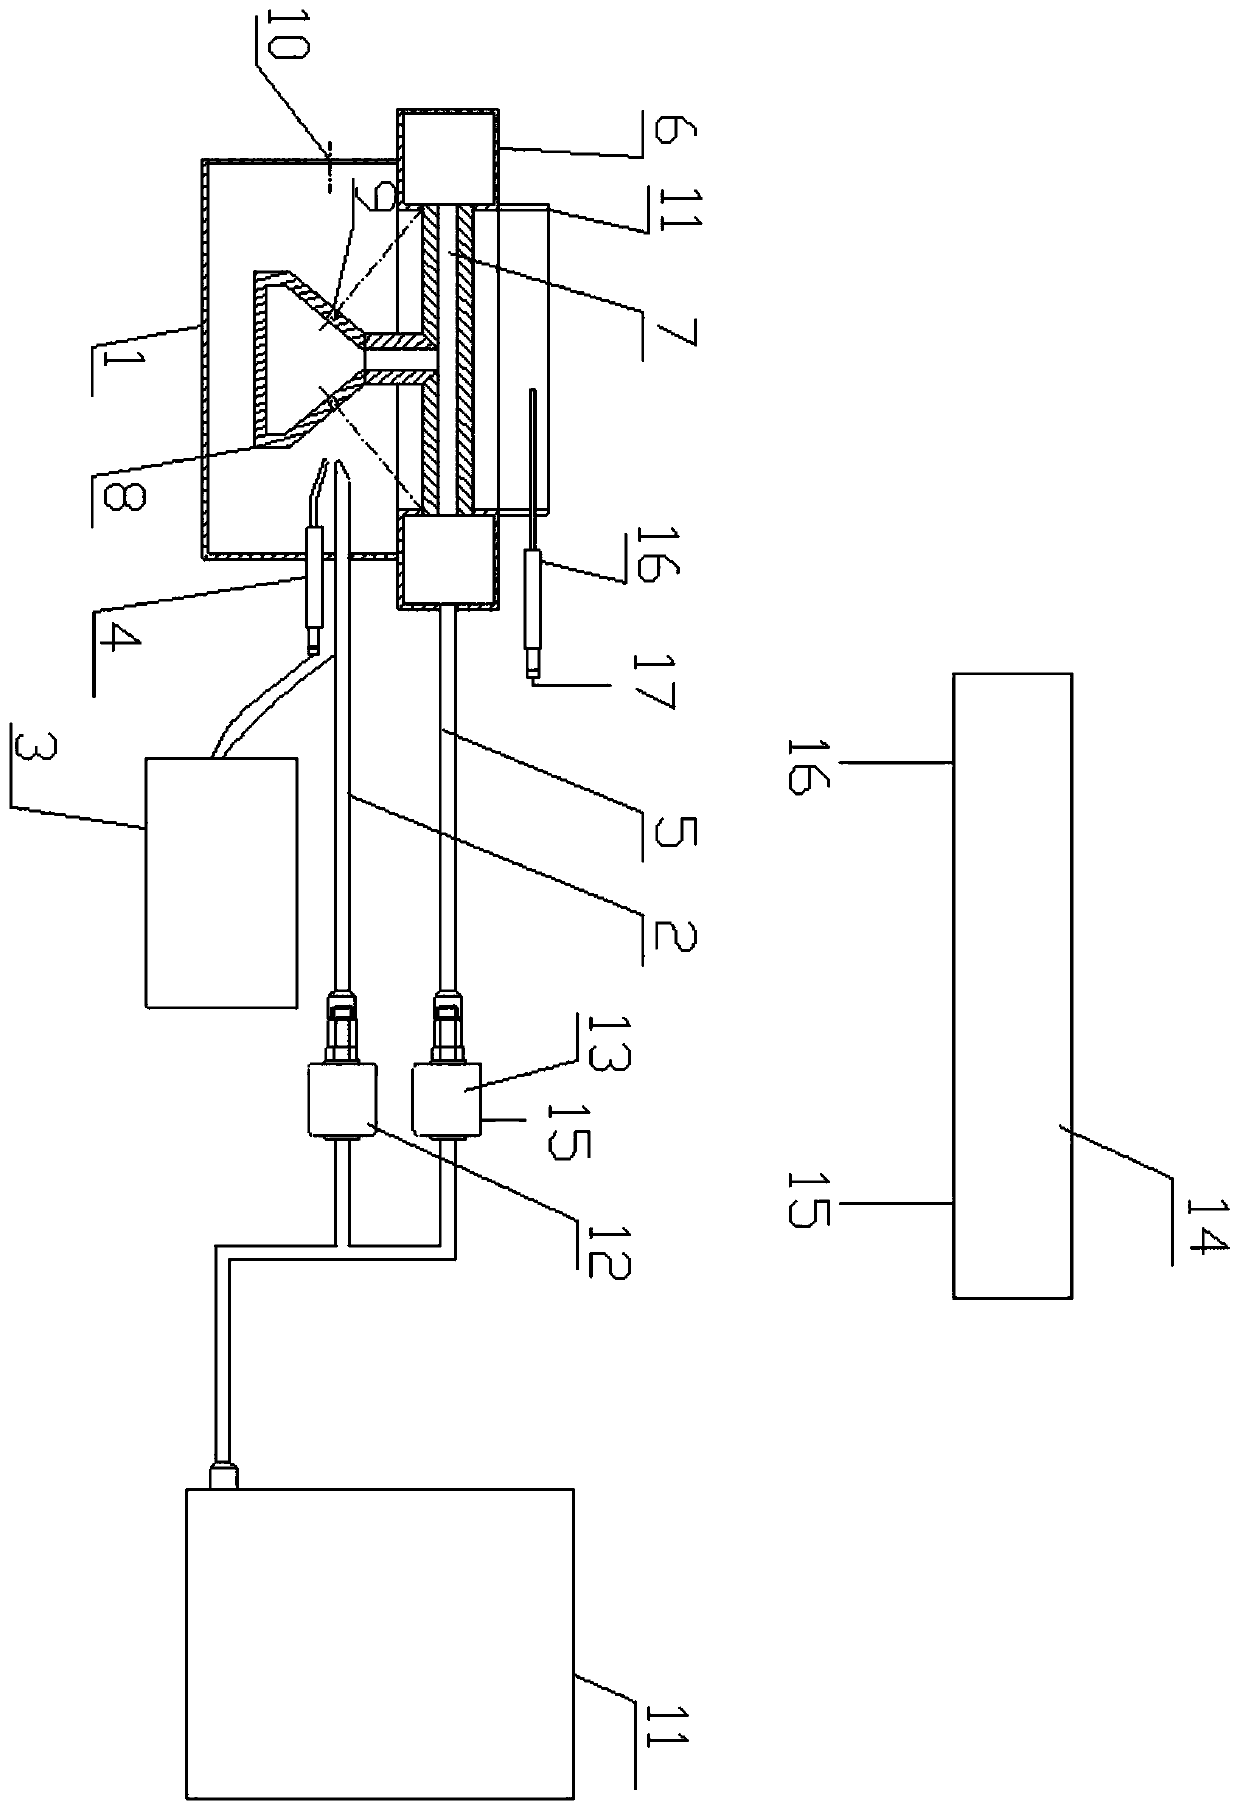 Small alcohol-based fuel self-heating, evaporating and combusting device for micro-flow control